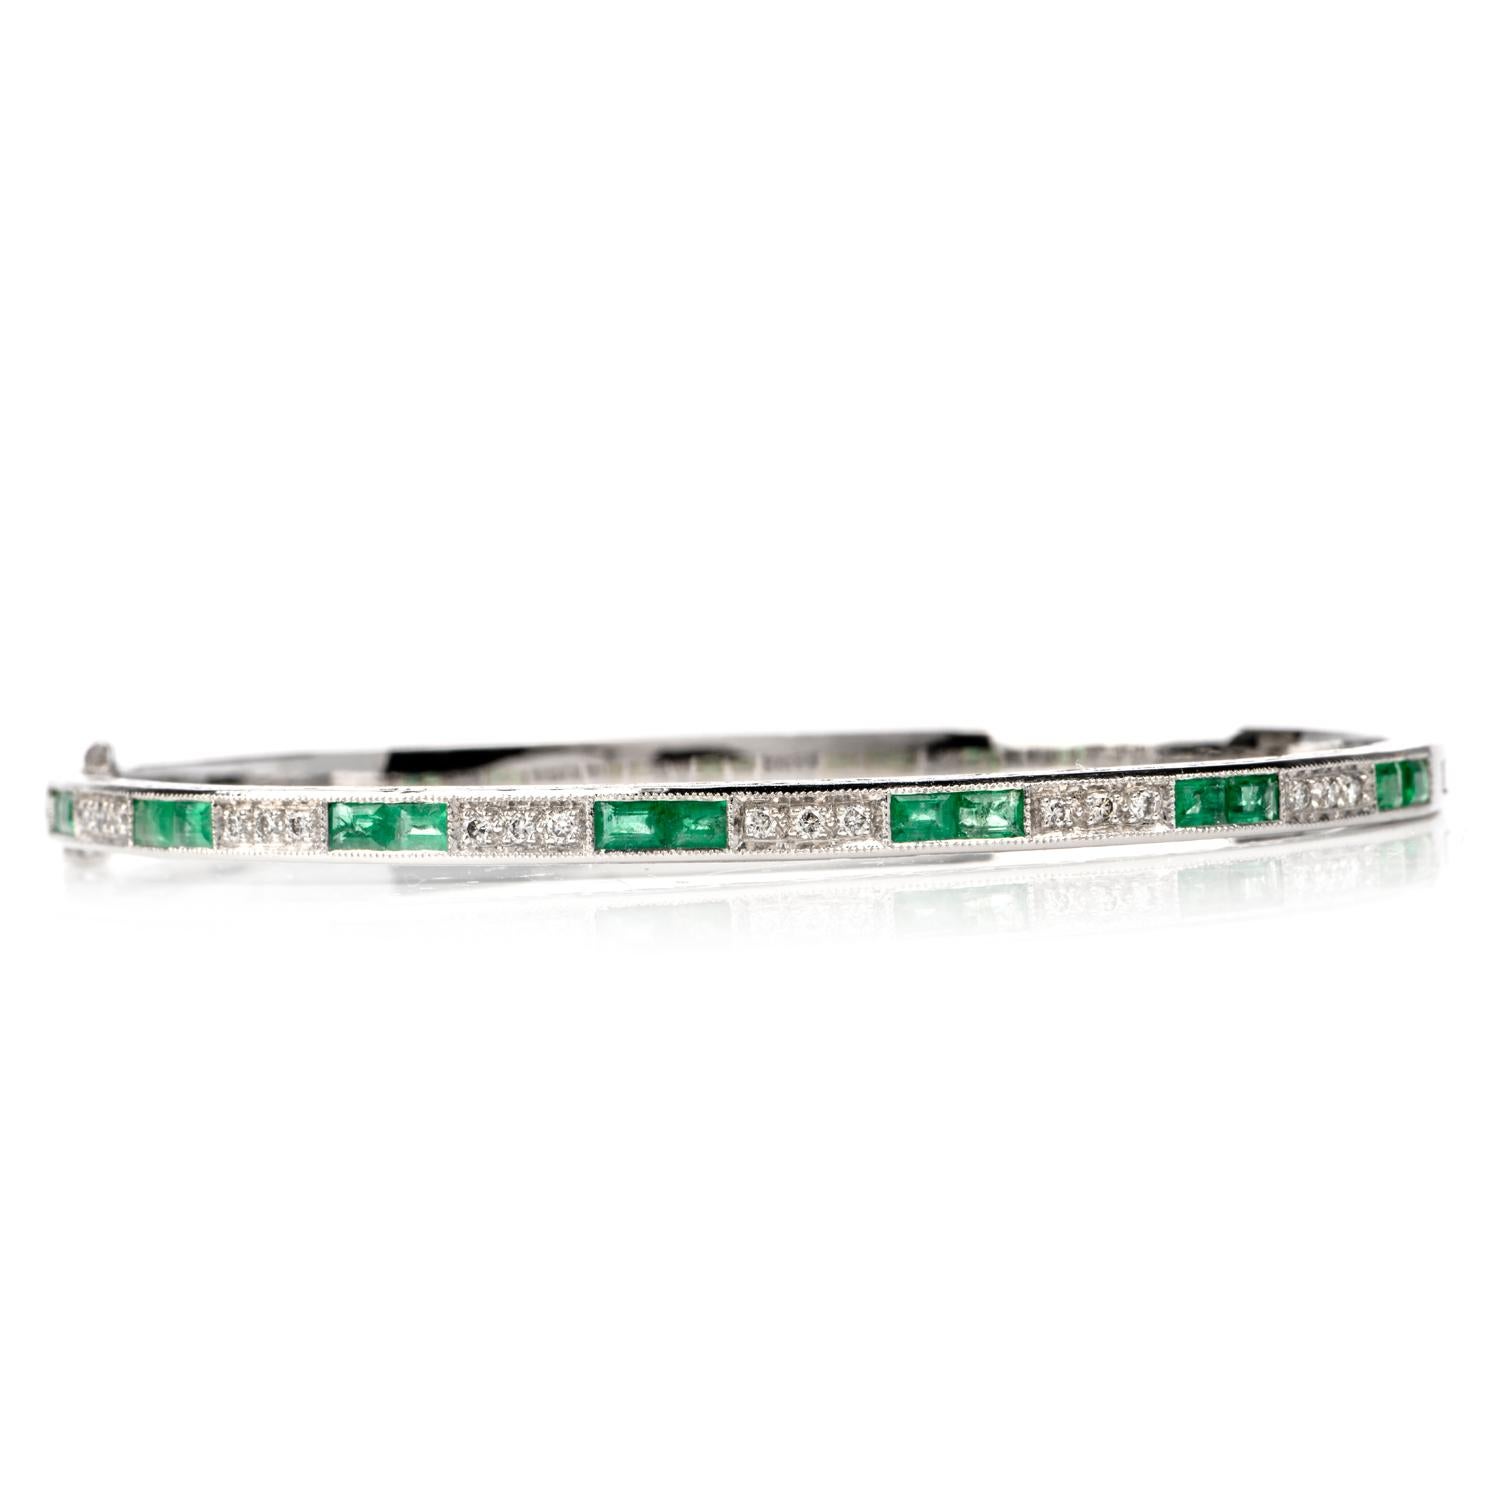 This stunning emerald and diamond bangle bracelet is crafted in 18-karat white gold. Displaying a filigree designed textured gold. Channel-set with 14 emerald-cut genuine emeralds weighing approximately 1.30 carats. Additionally, channel-set with 18